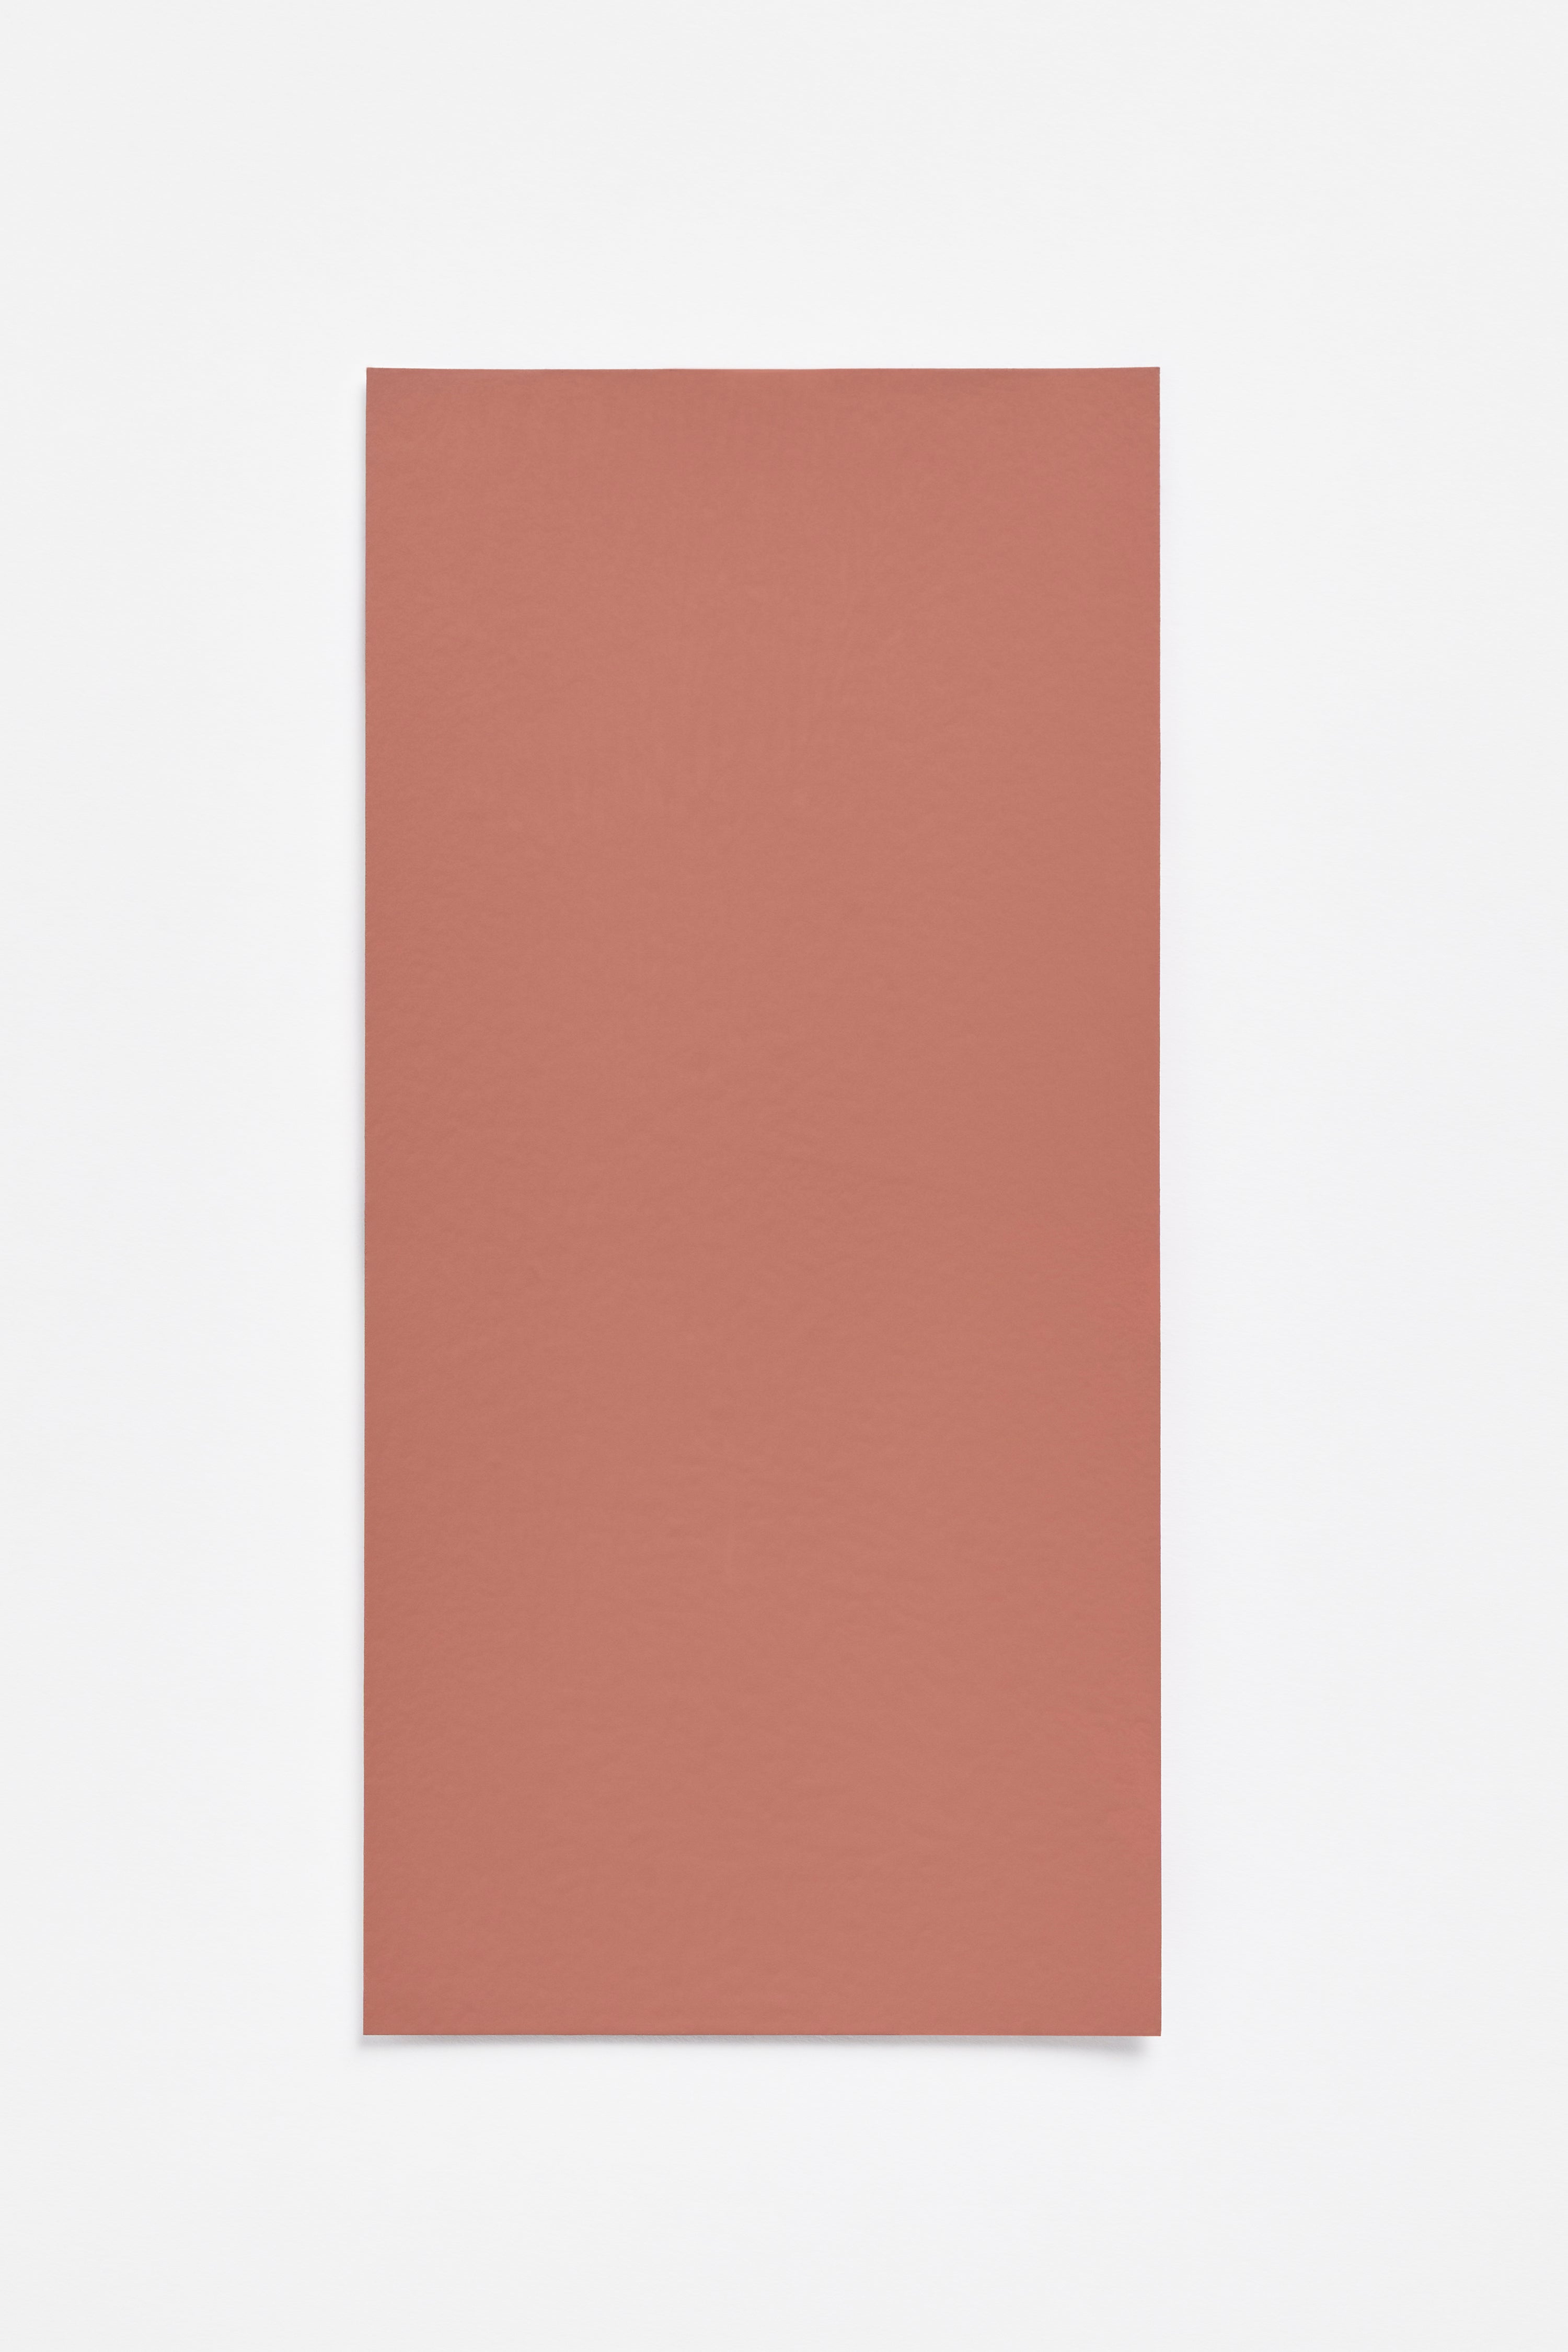 Berlin — a paint colour developed by David Chipperfield for Blēo